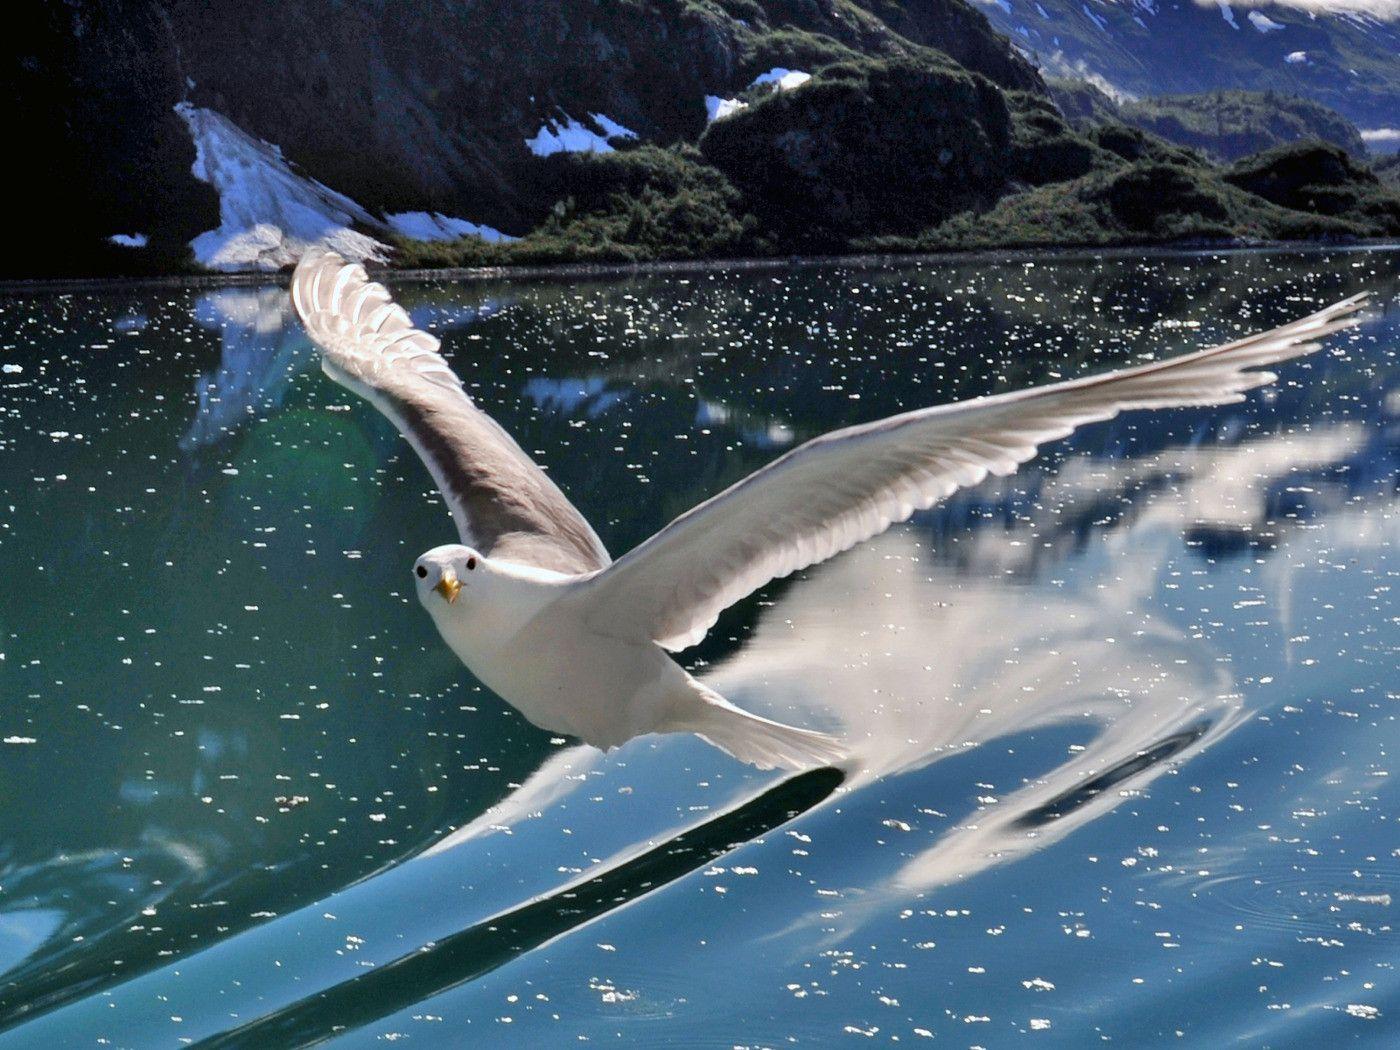 Glorious Seagull Flying over Water widescreen wallpaper. Wide